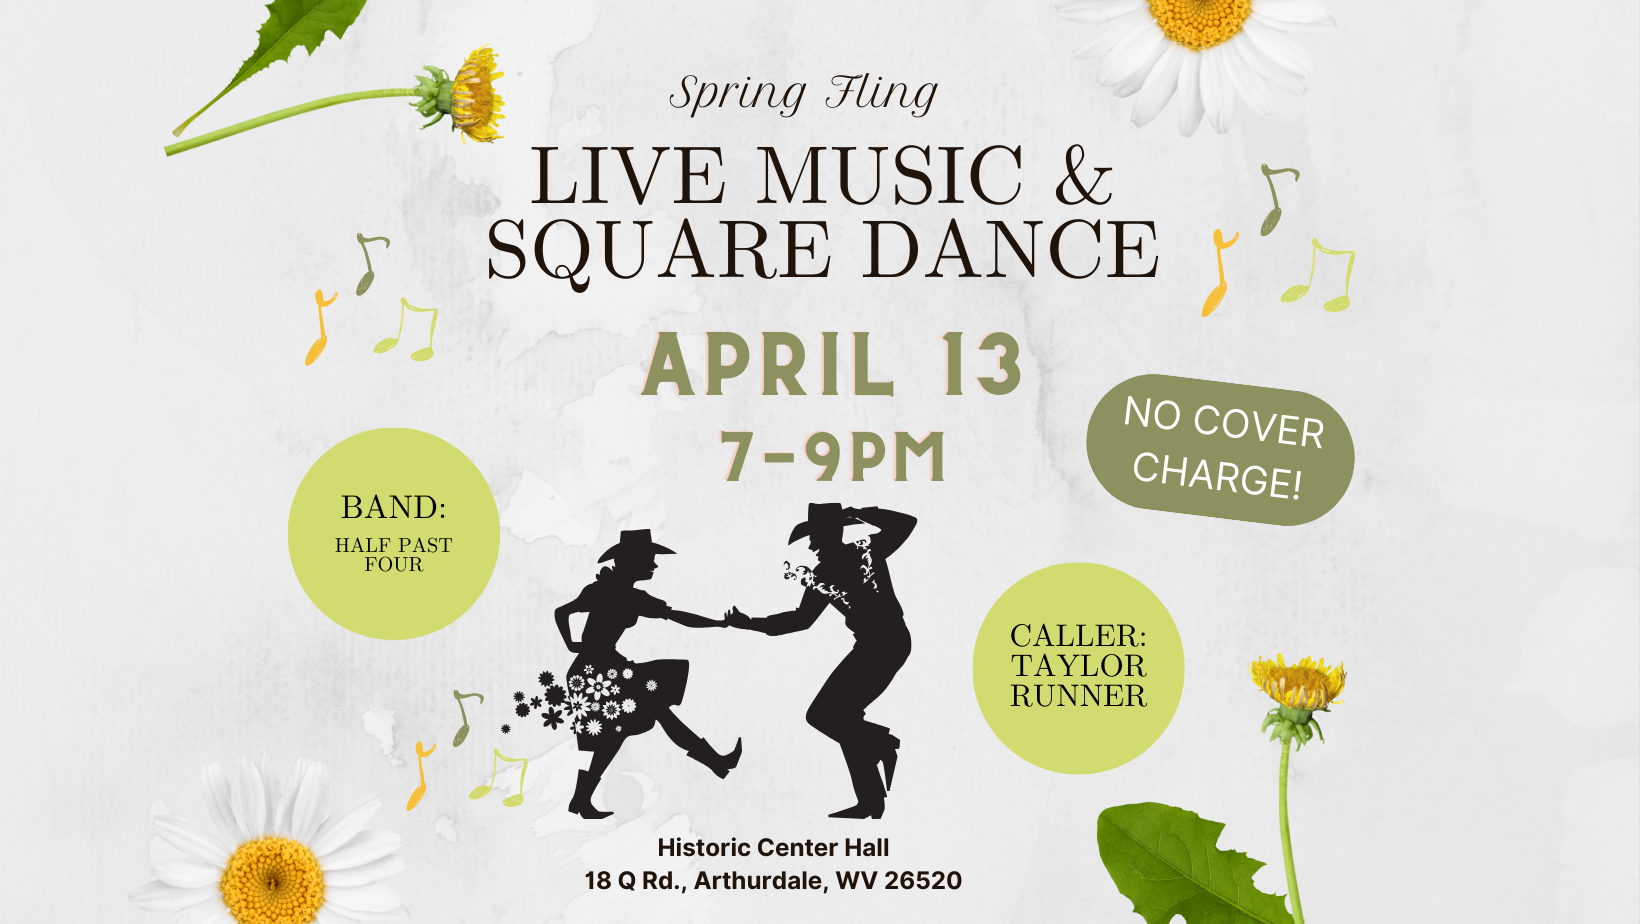 Event Promo Photo For Spring Fling Live Music & Square Dance